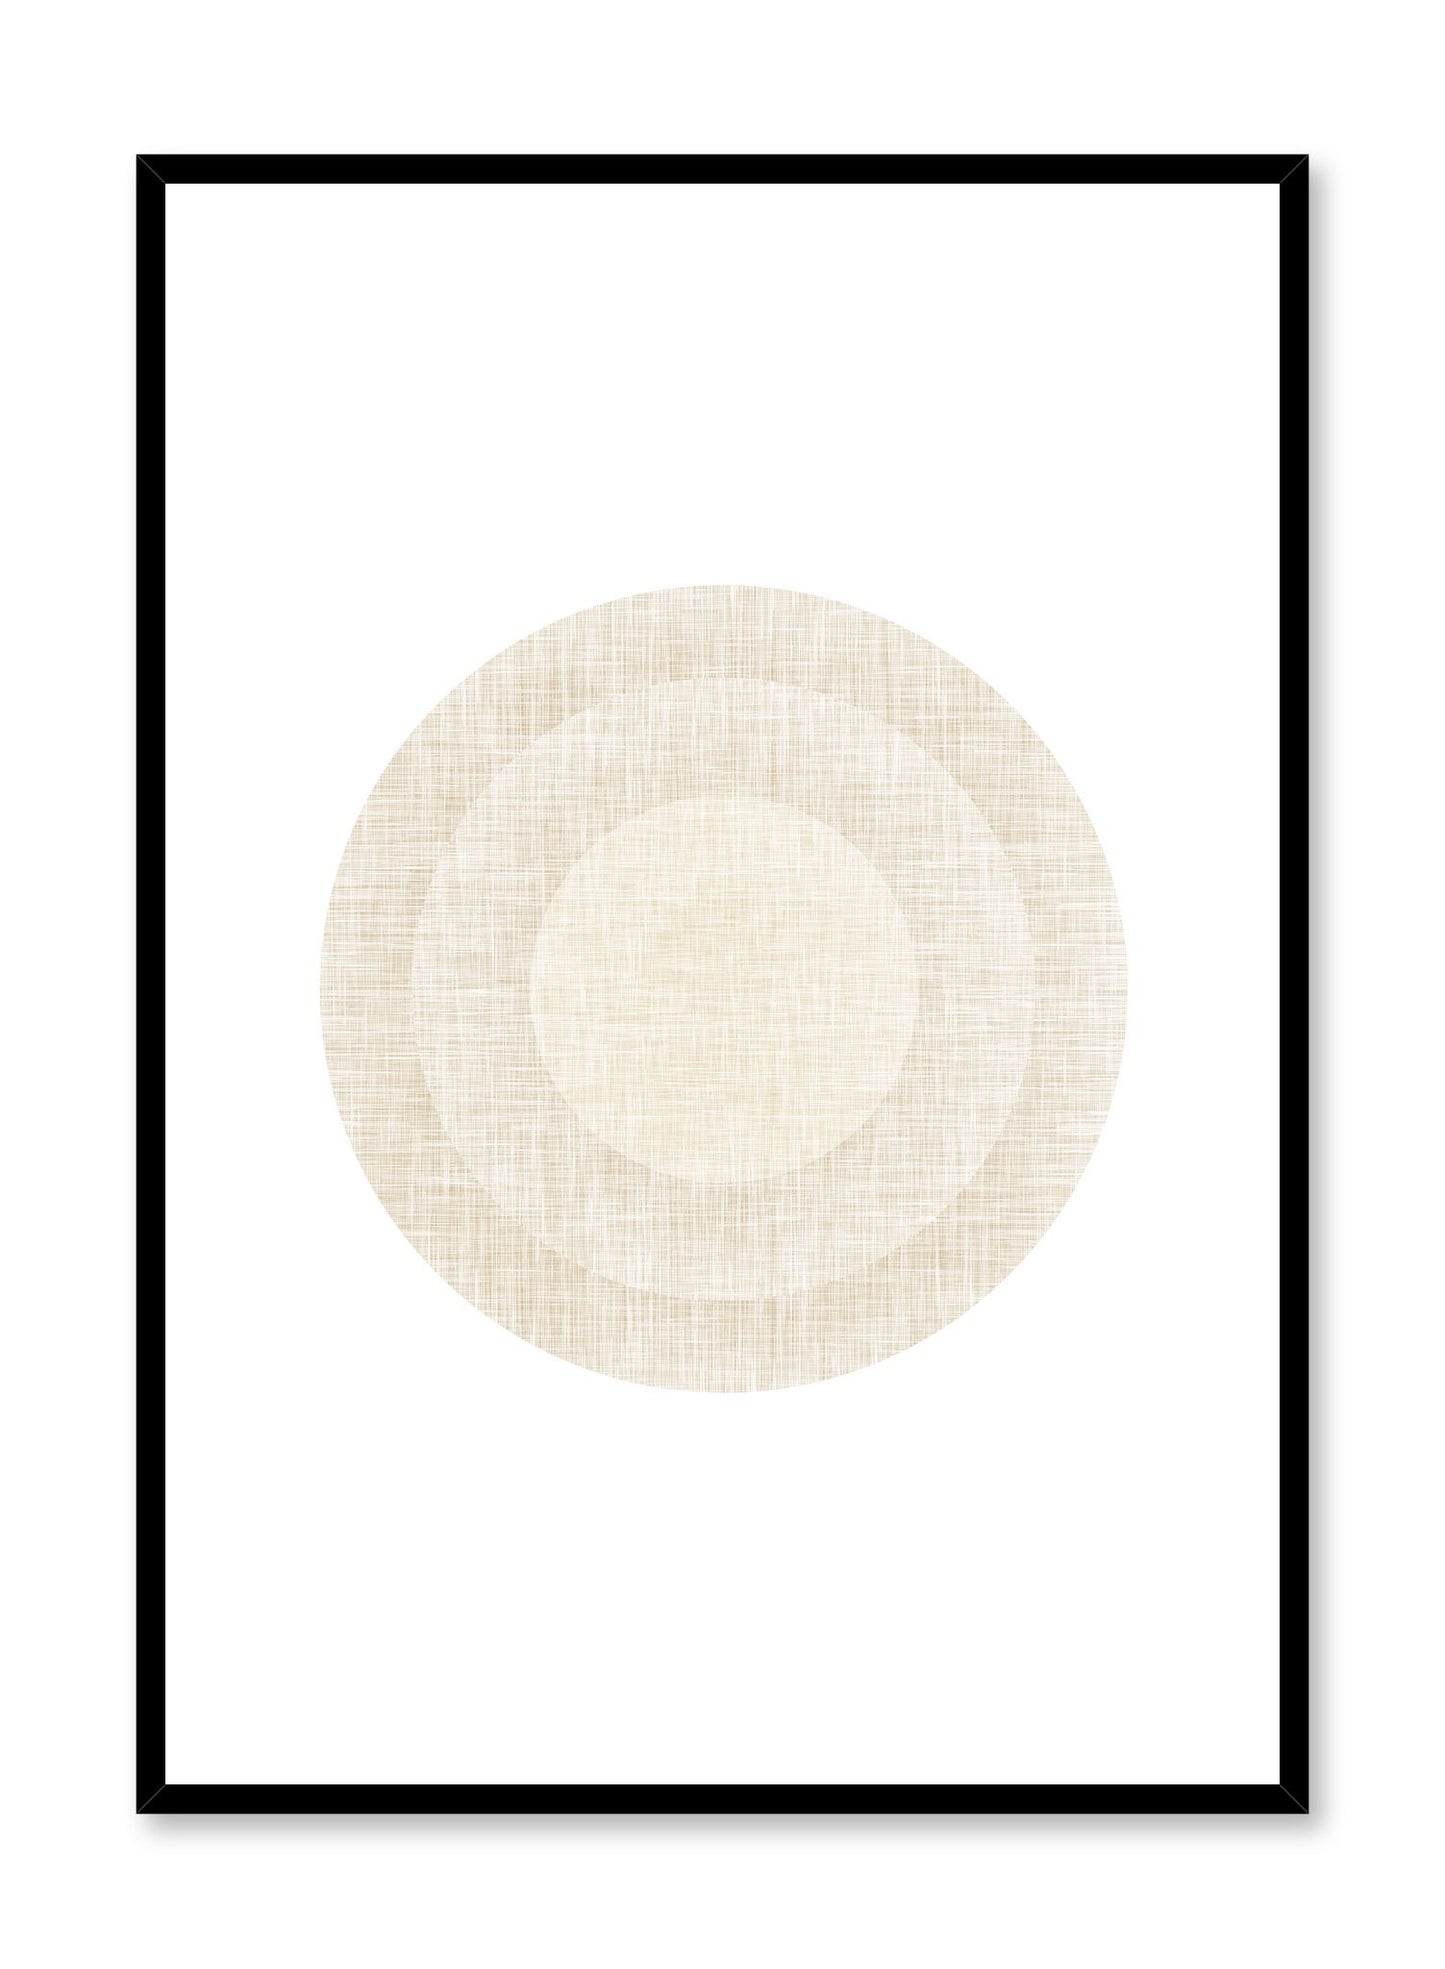 Minimalist design poster by Opposite Wall with abstract beige circles